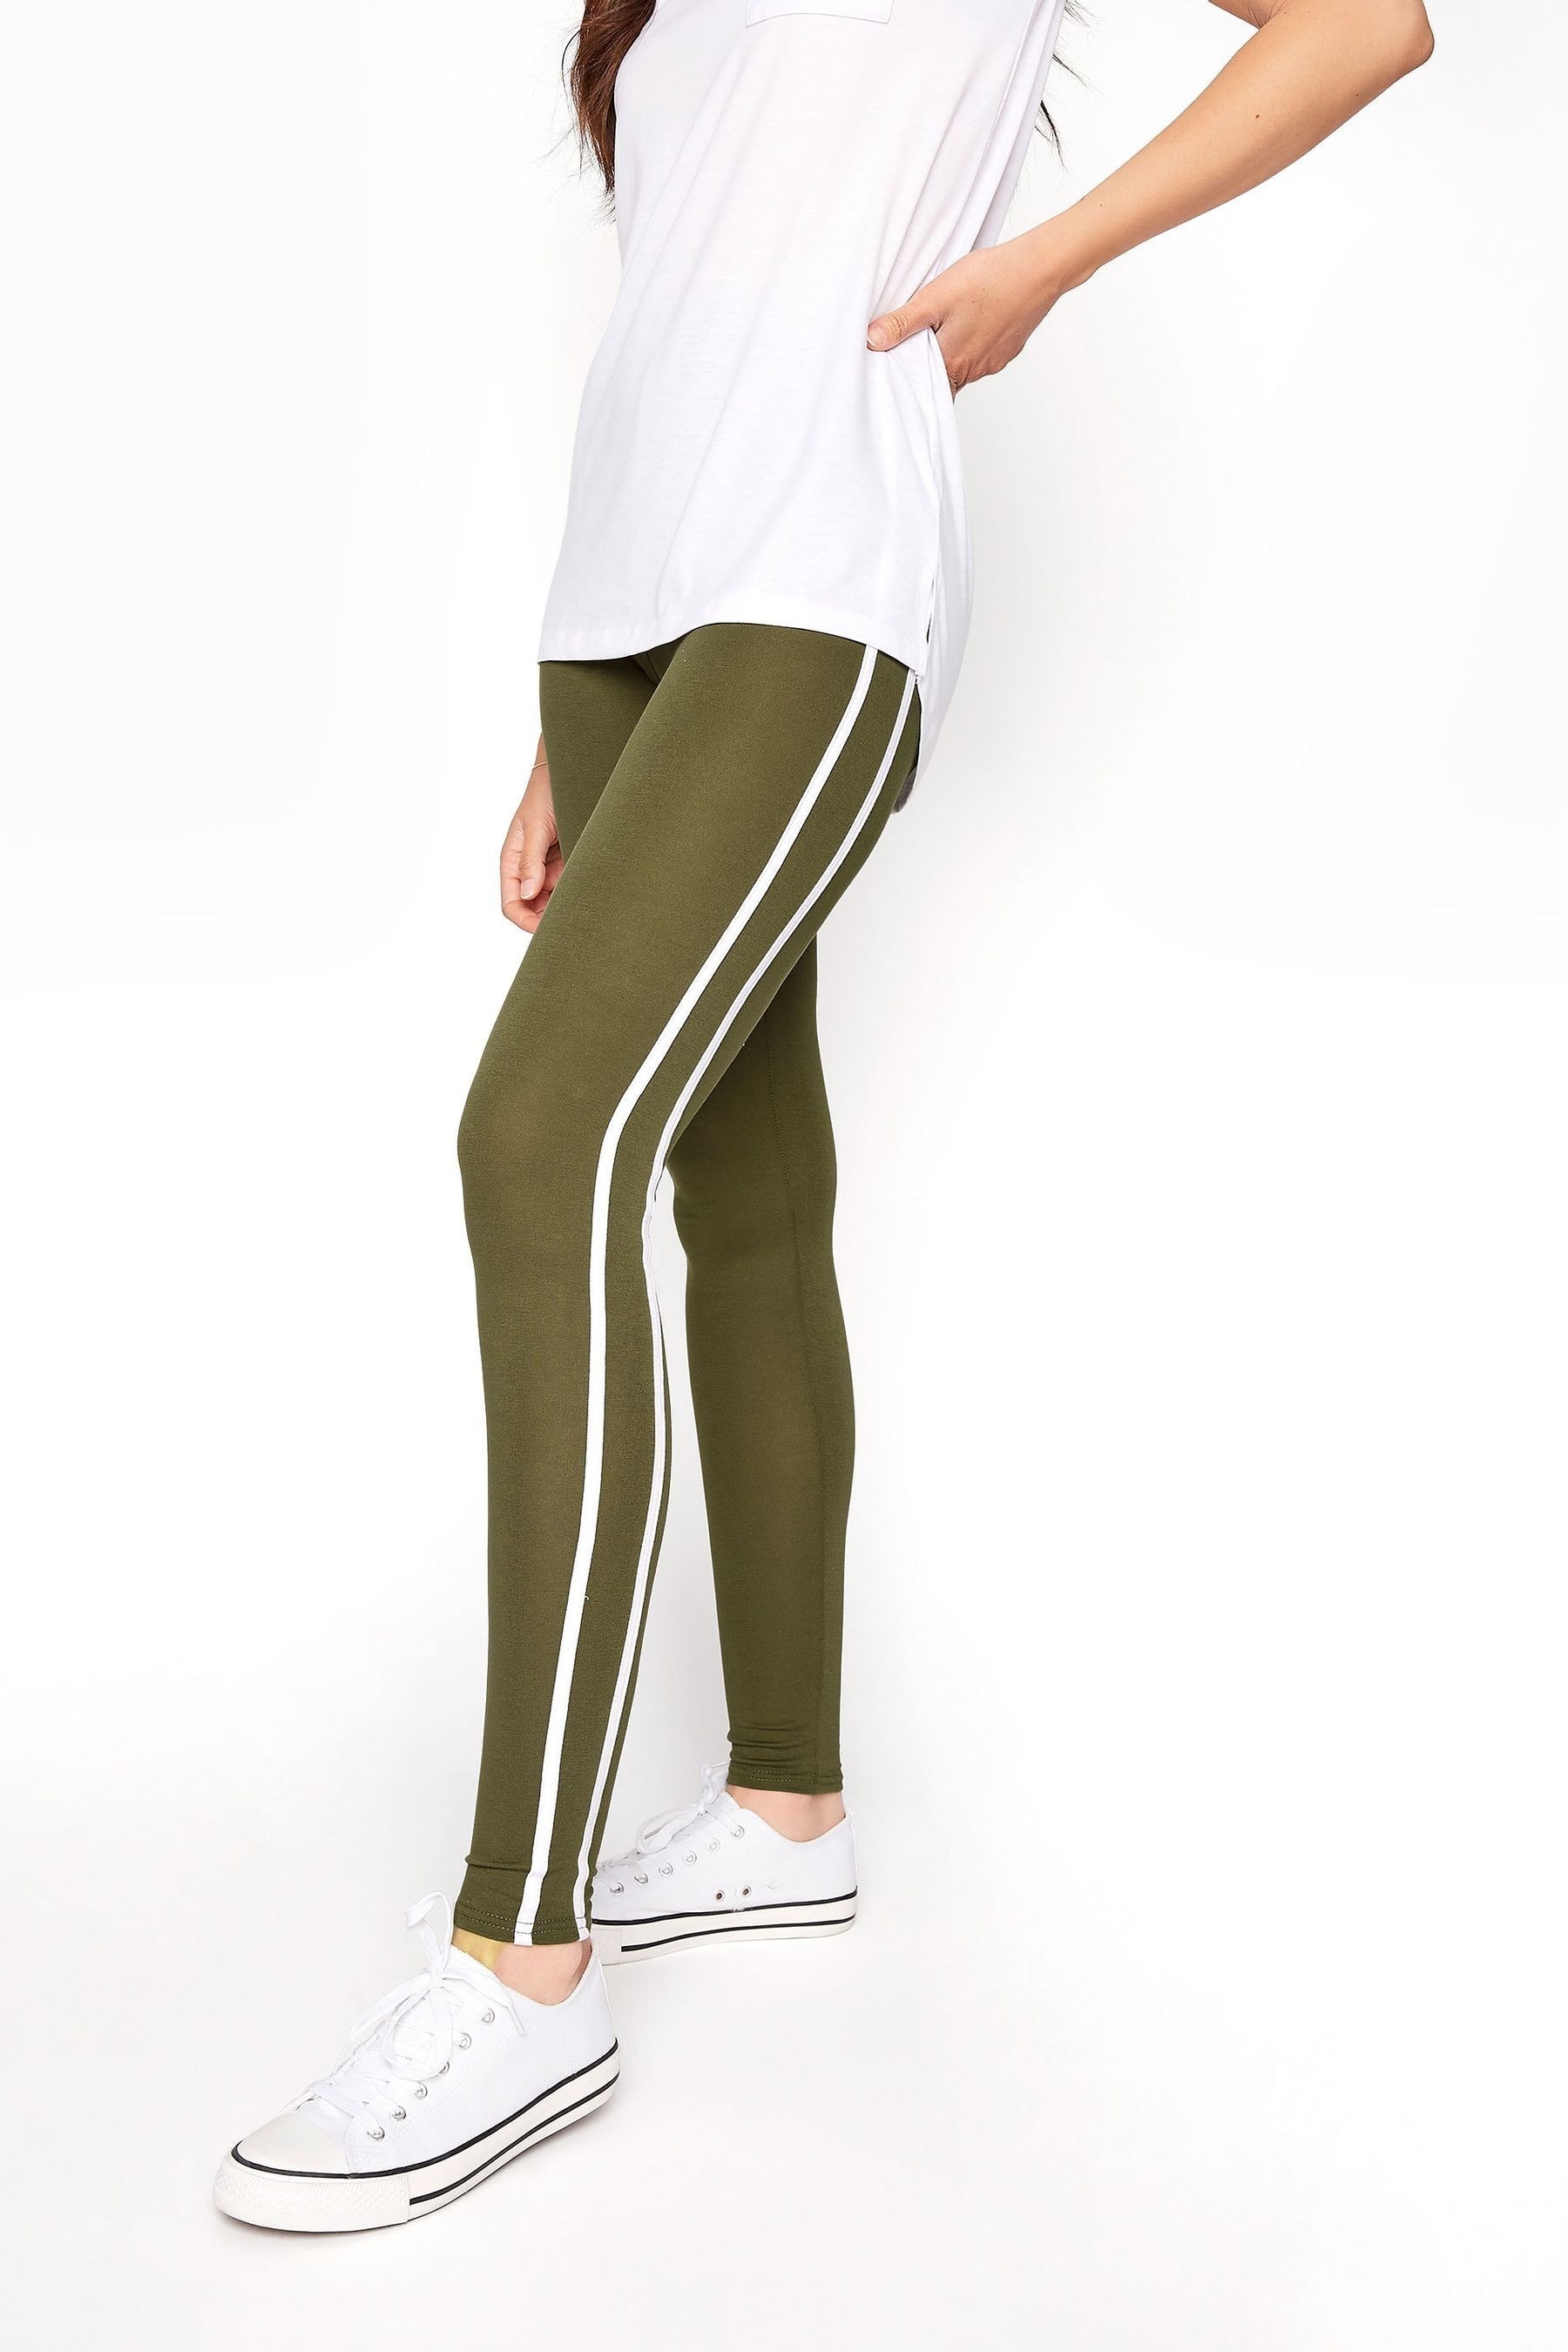 Long Tall Sally Uk Leggings  International Society of Precision Agriculture